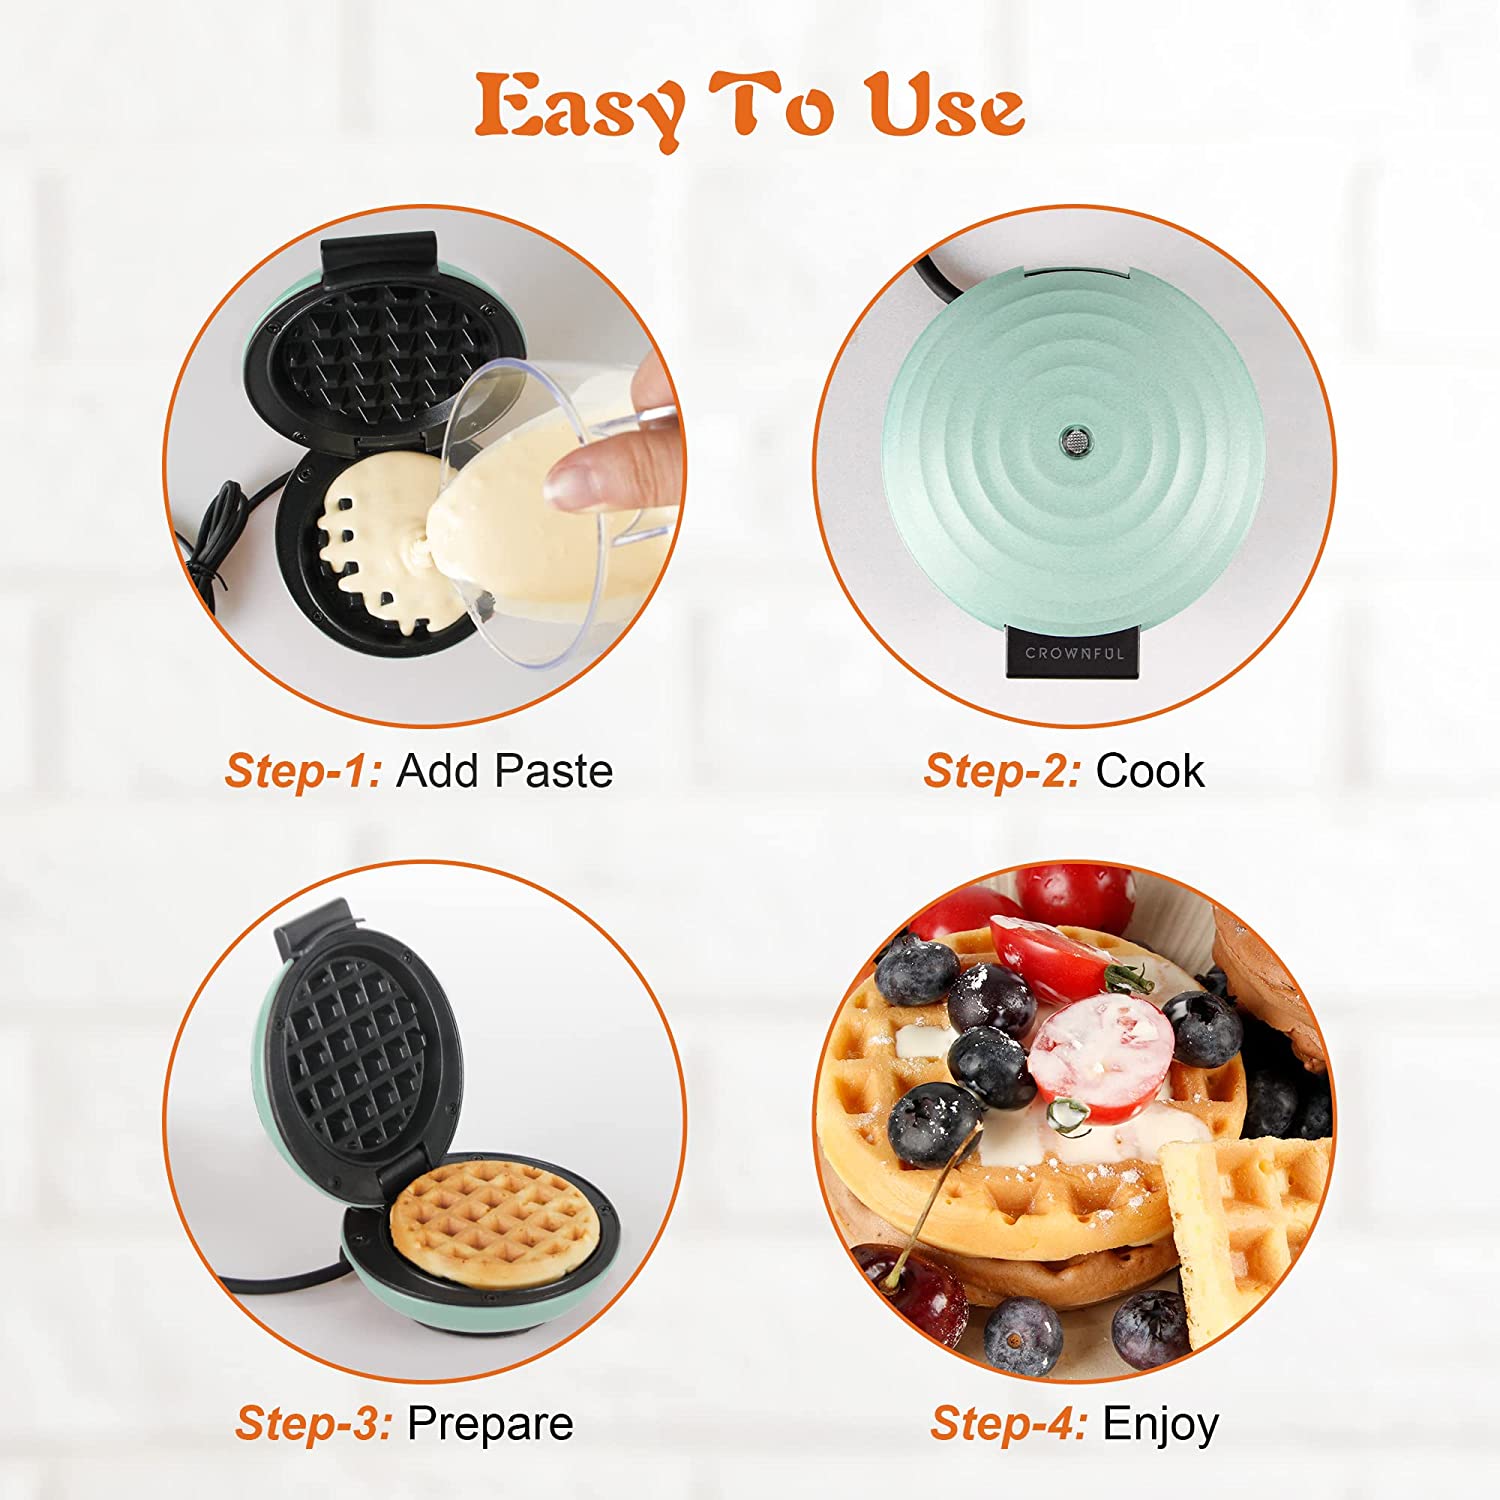 Crownful Mini Waffle Maker Machine, 4 Inches Portable Small Compact Design, Easy to Clean, Non-Stick Surface, Recipe Guide Included, Perfect for